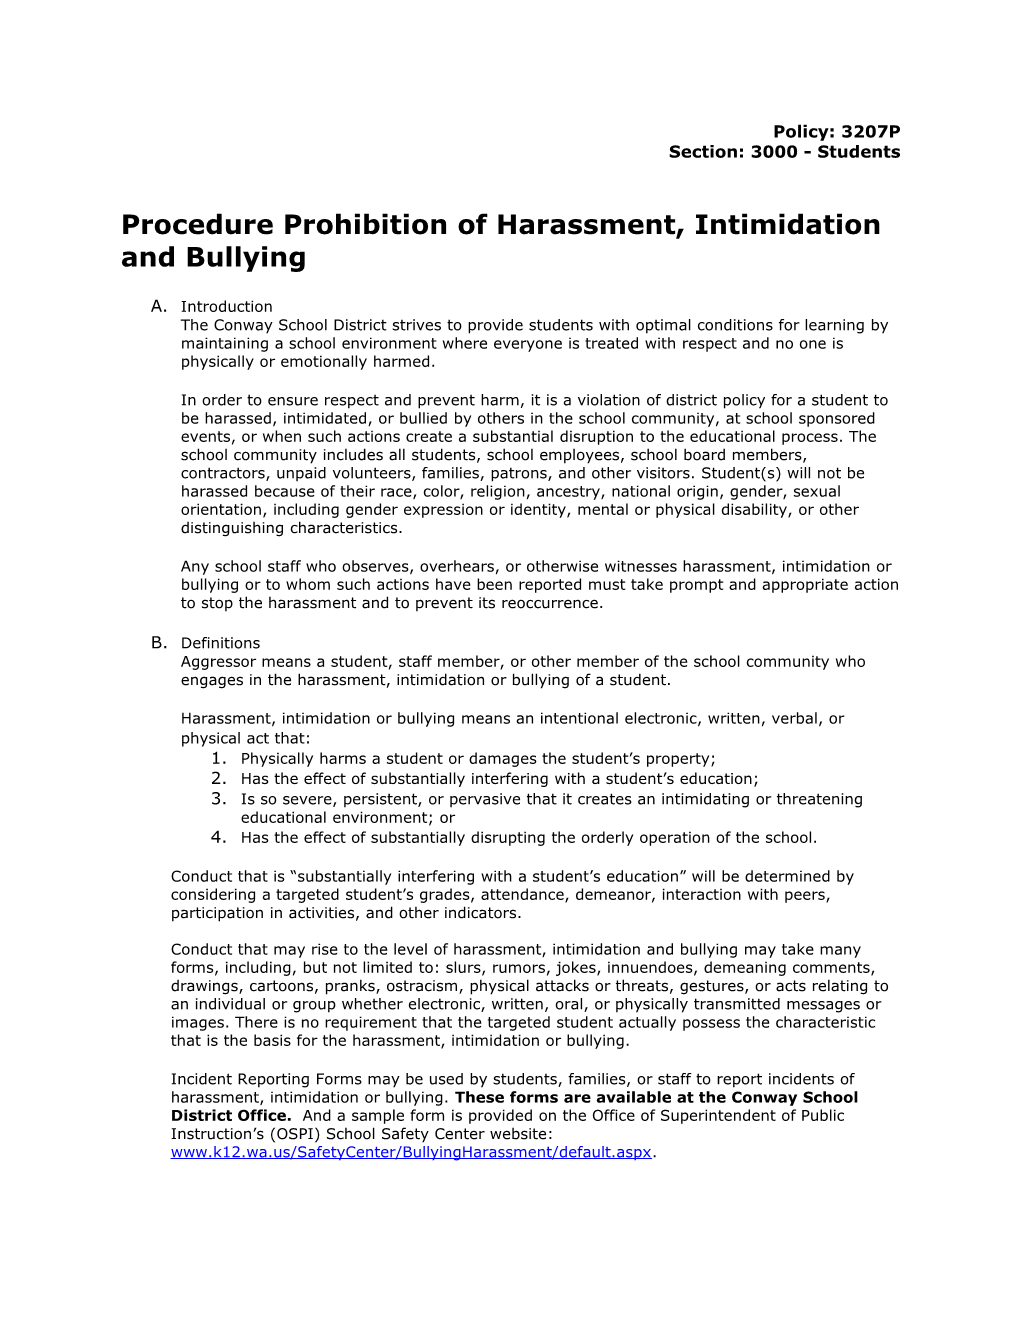 Procedure Prohibition of Harassment, Intimidation and Bullying